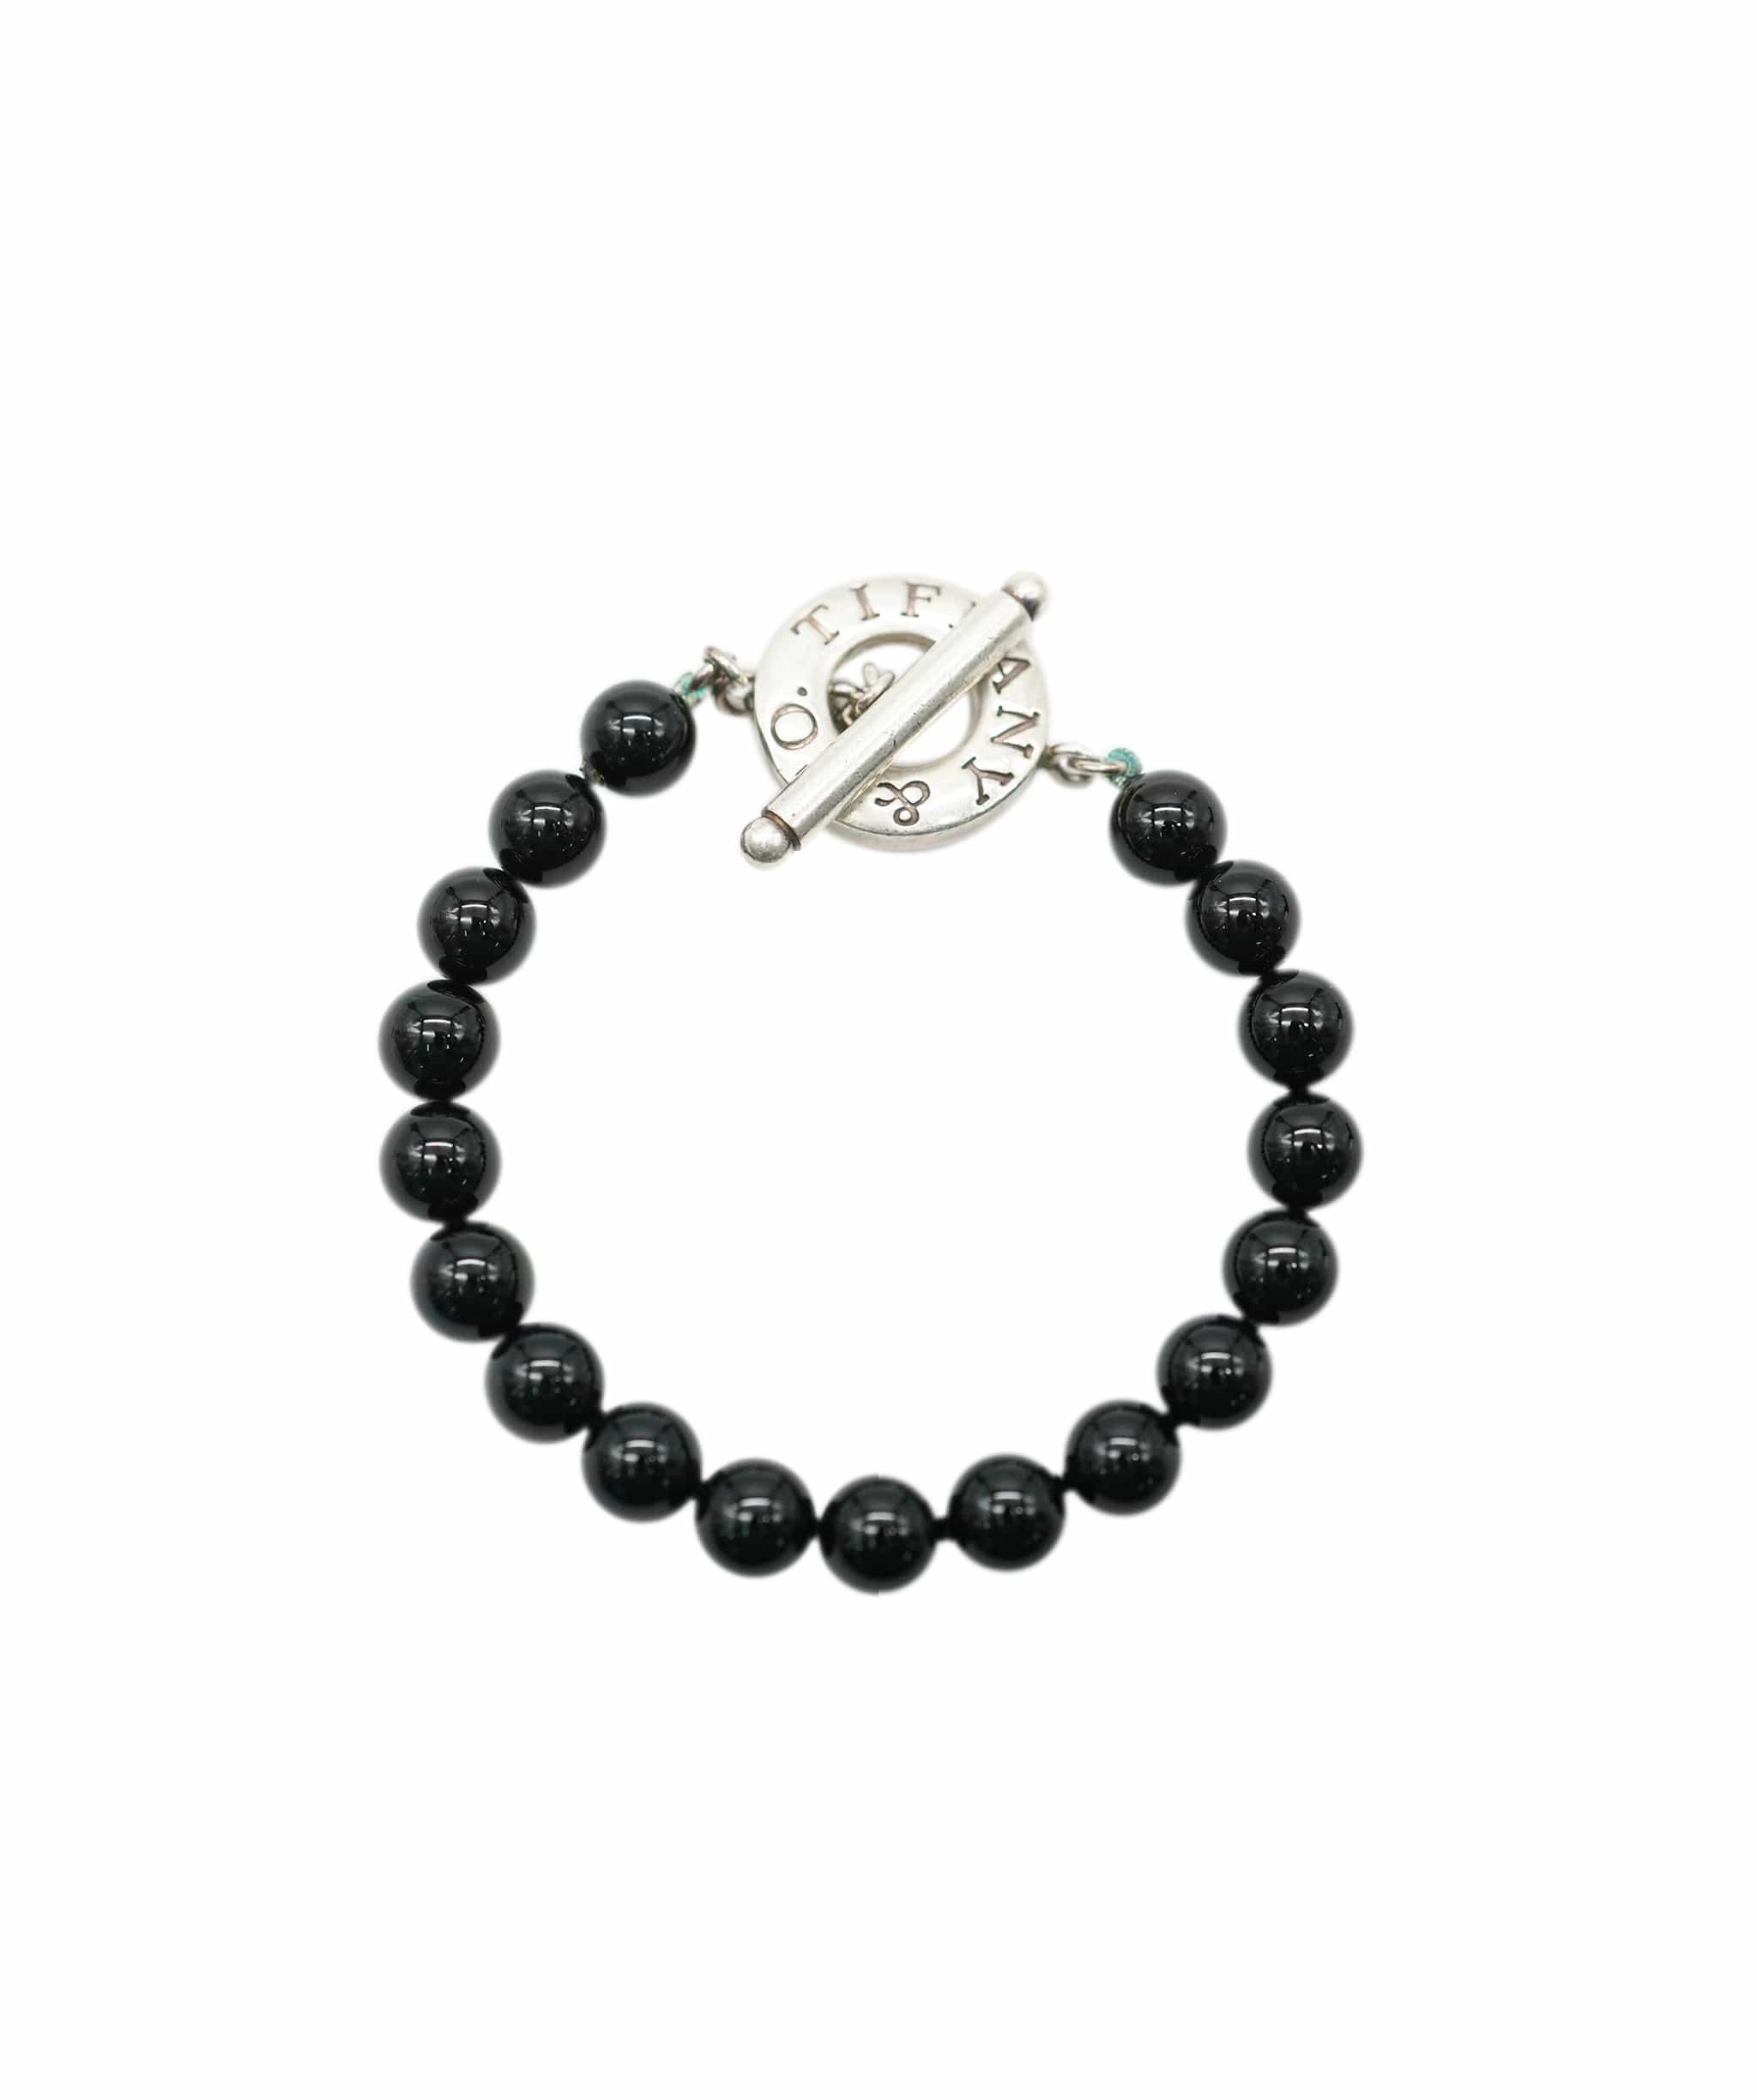 Tiffany & Co. Tiffany & Co. Onyx Bead Sterling Silver Bracelet With Toggle Clasp ABC0714